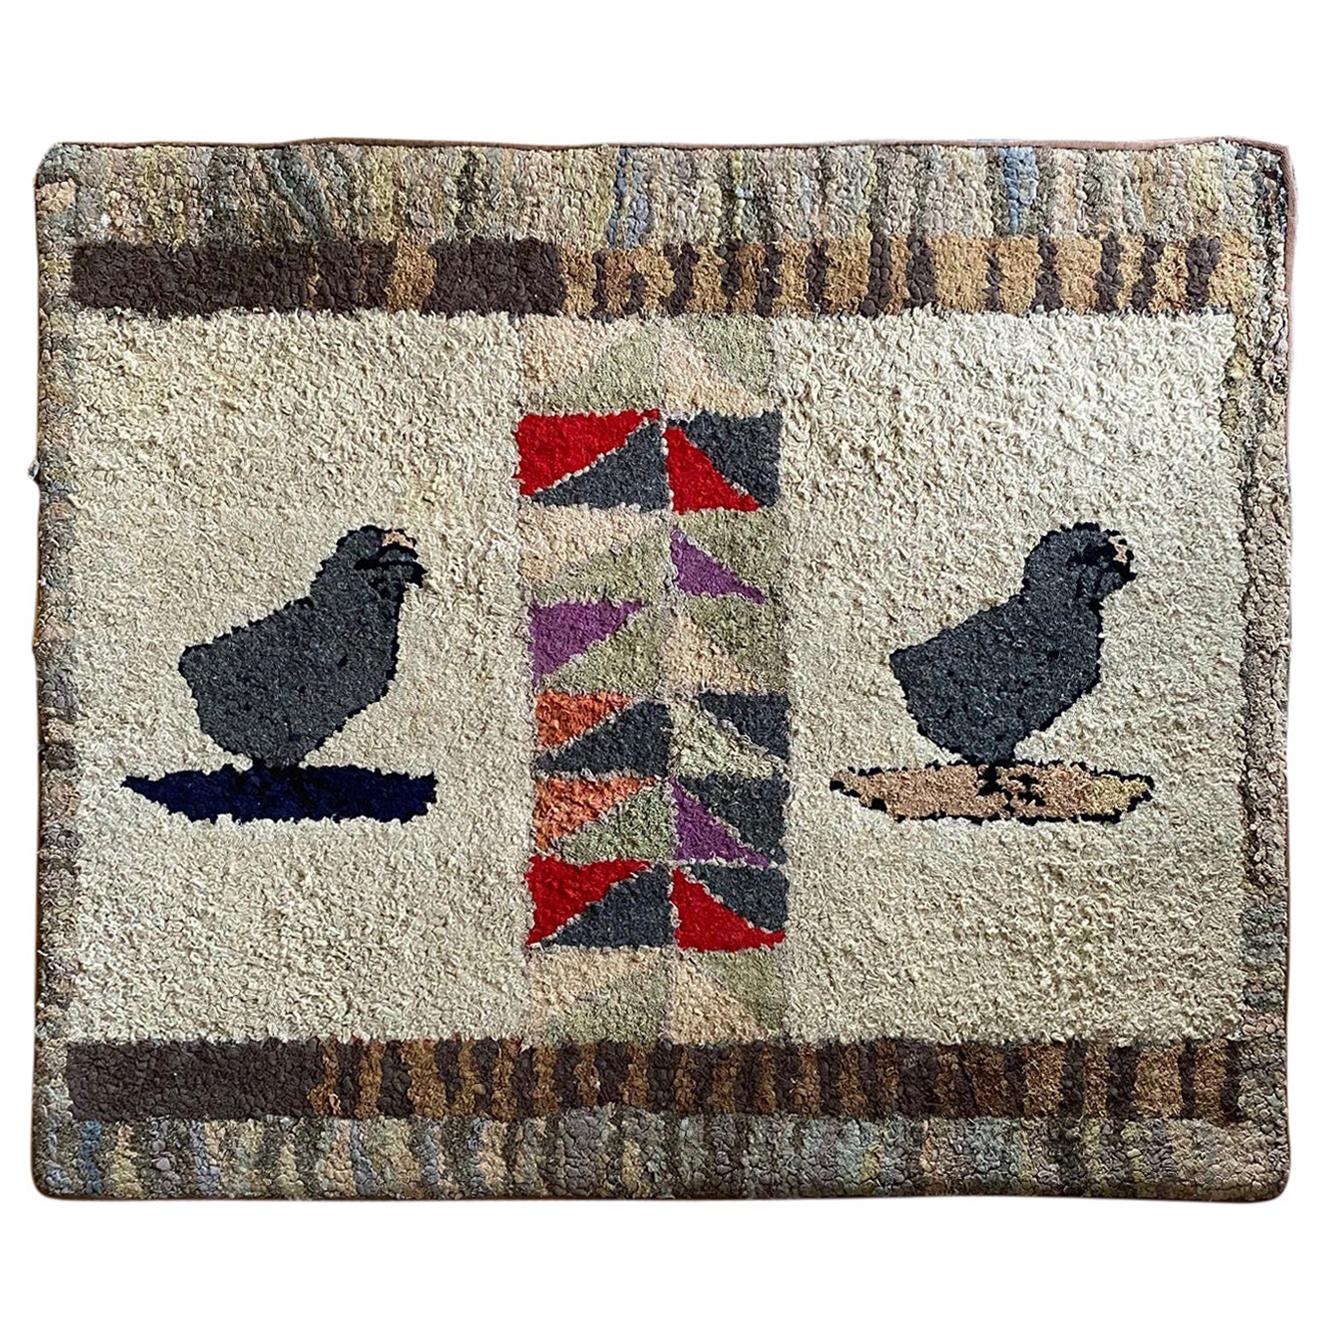 Folk Art Hand Hooked Rug with Chickens, circa 1880 For Sale